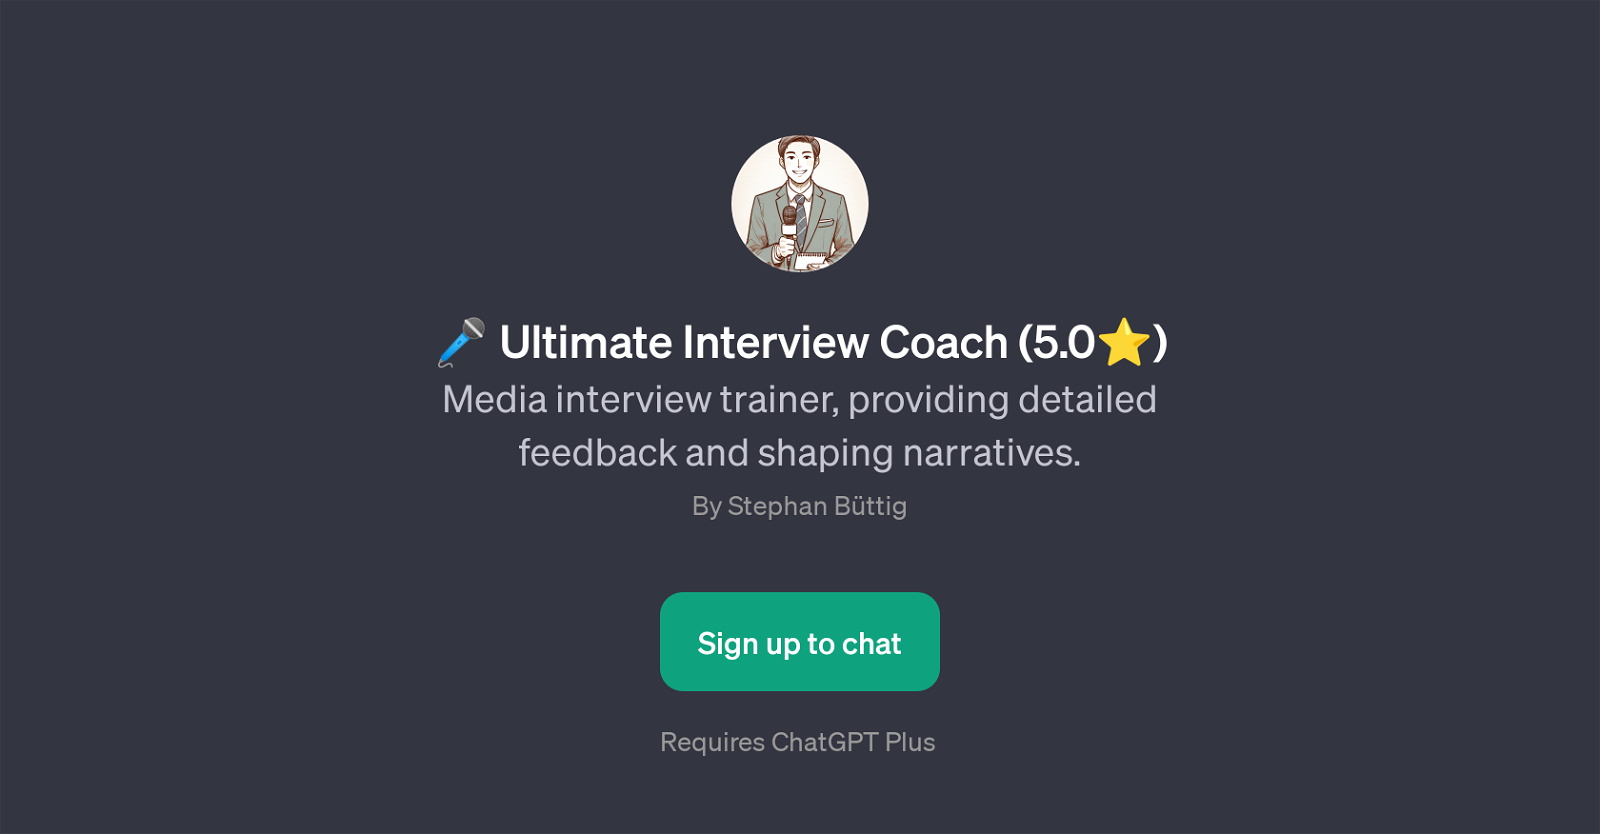 Ultimate Interview Coach website